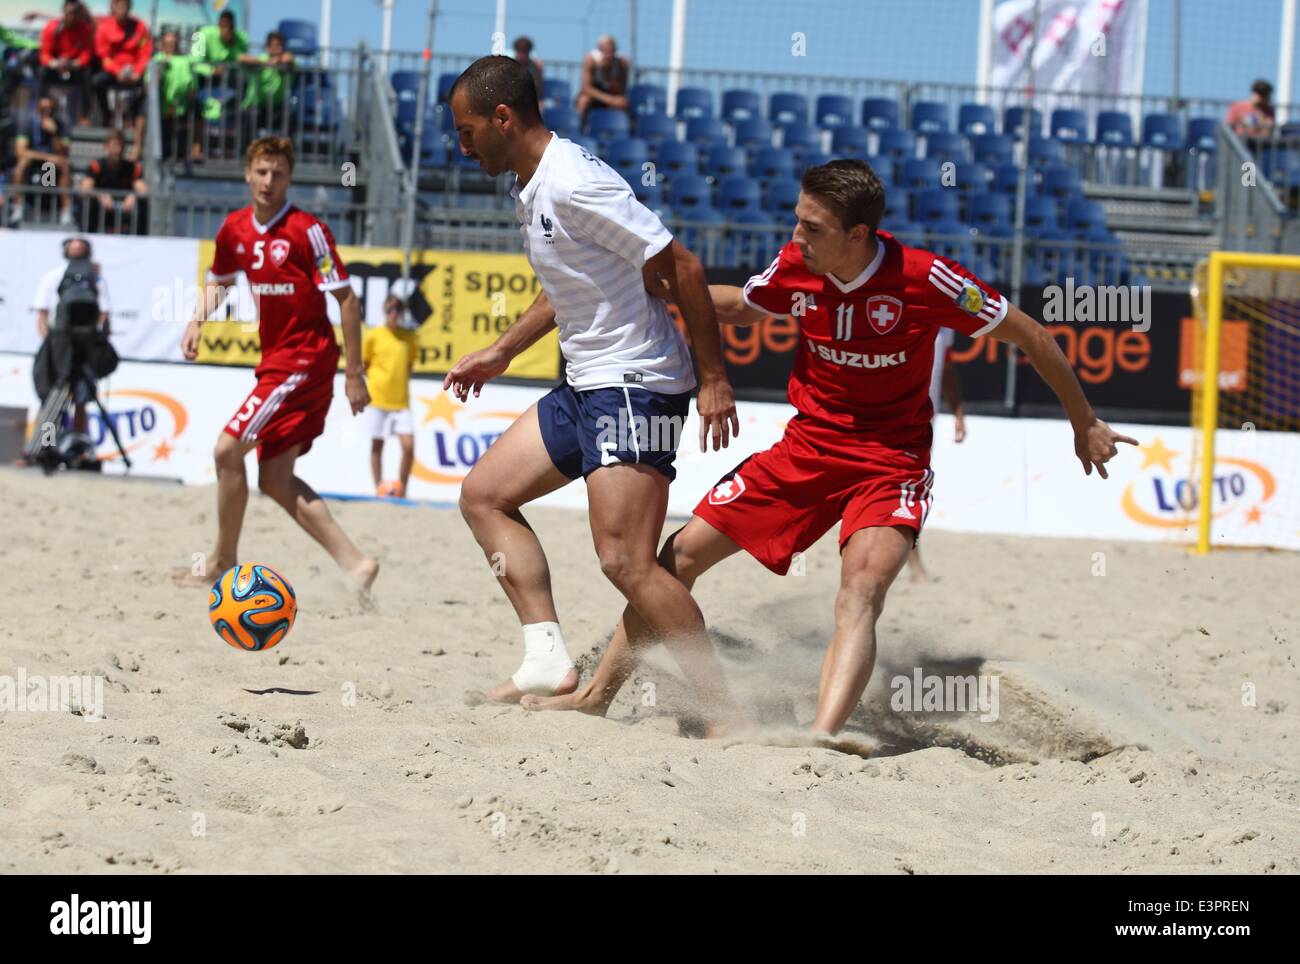 Sopot, Poland. 27th June, 2014. Euro Beach Soccer League tournament in Sopot. Game between France and Switzerland. Noel Ott (11) in action against Didler Samoun (5) during the game. Credit:  Michal Fludra/Alamy Live News Stock Photo